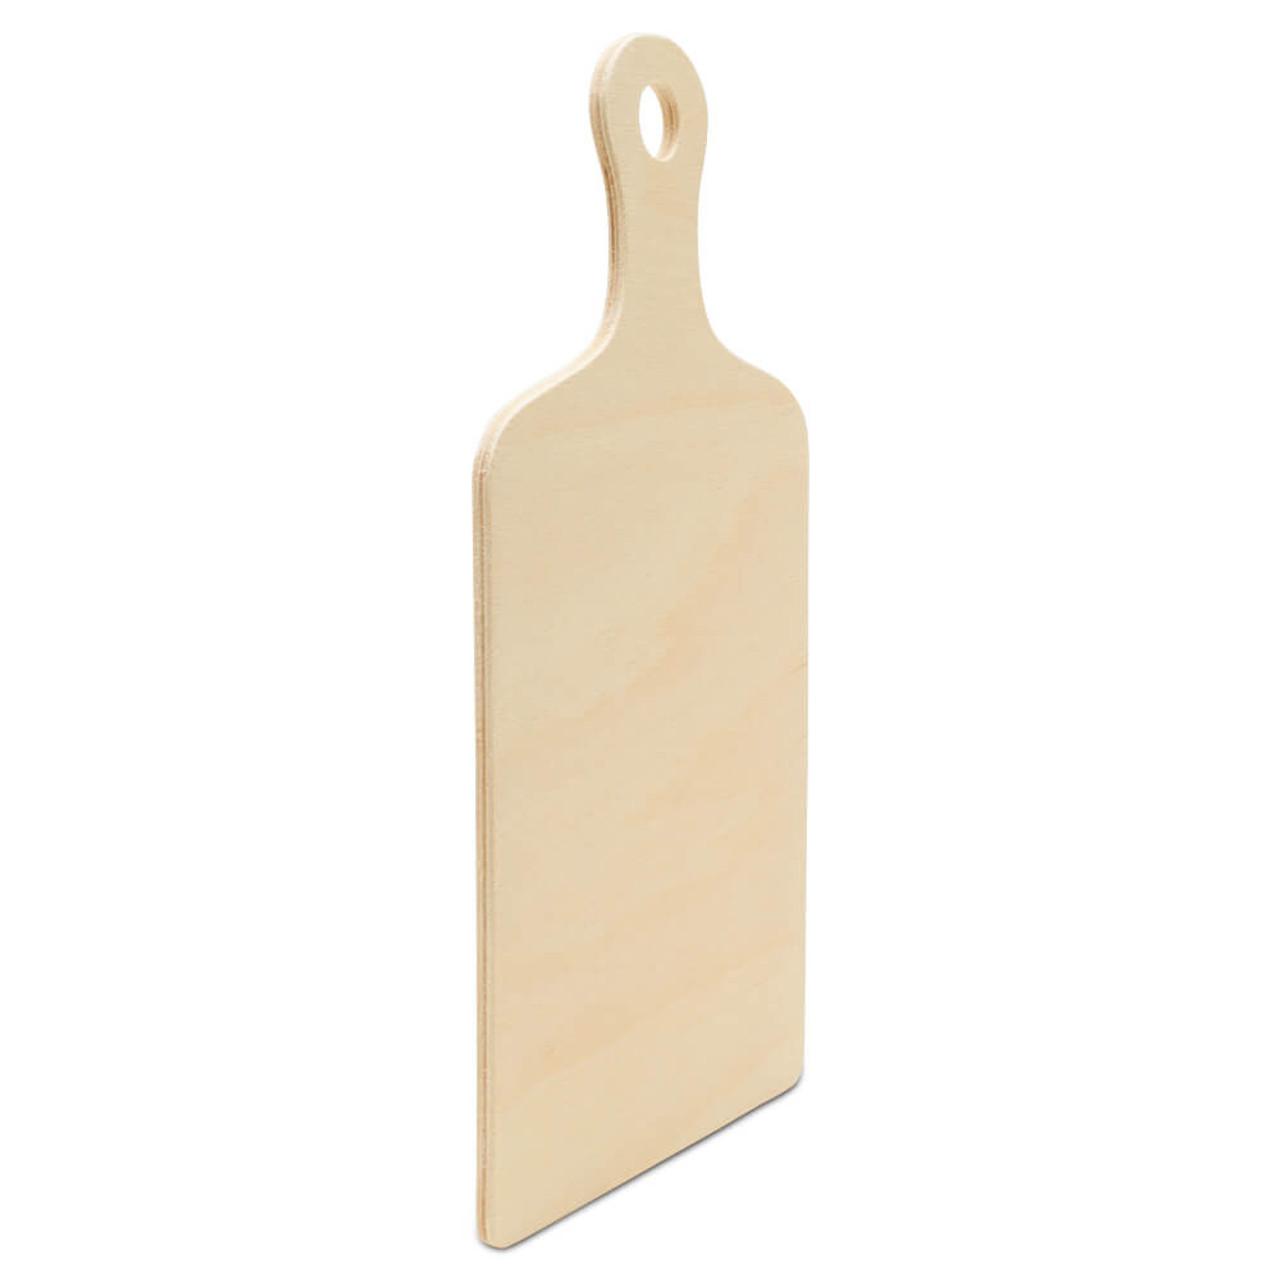 Unfinished Wood Cutting Board Crafting Shape - Kitchen - Craft